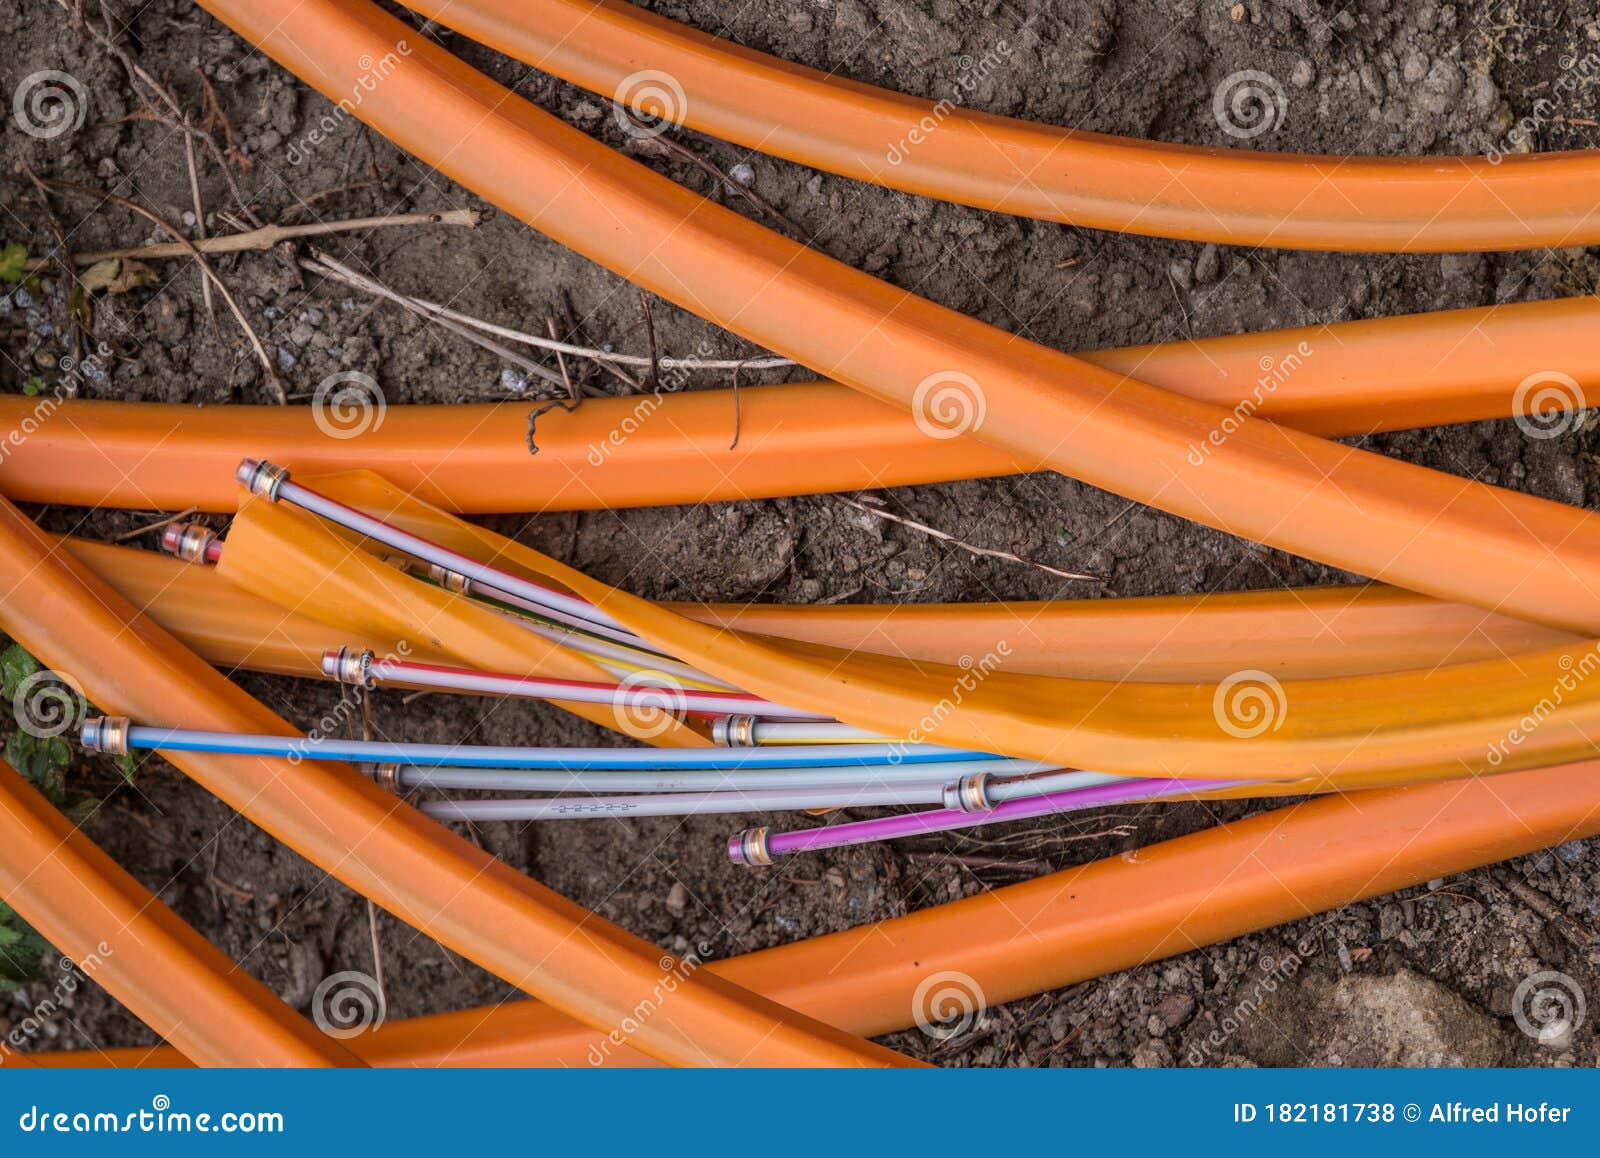 internet connection fiber optic cable - broadband connection